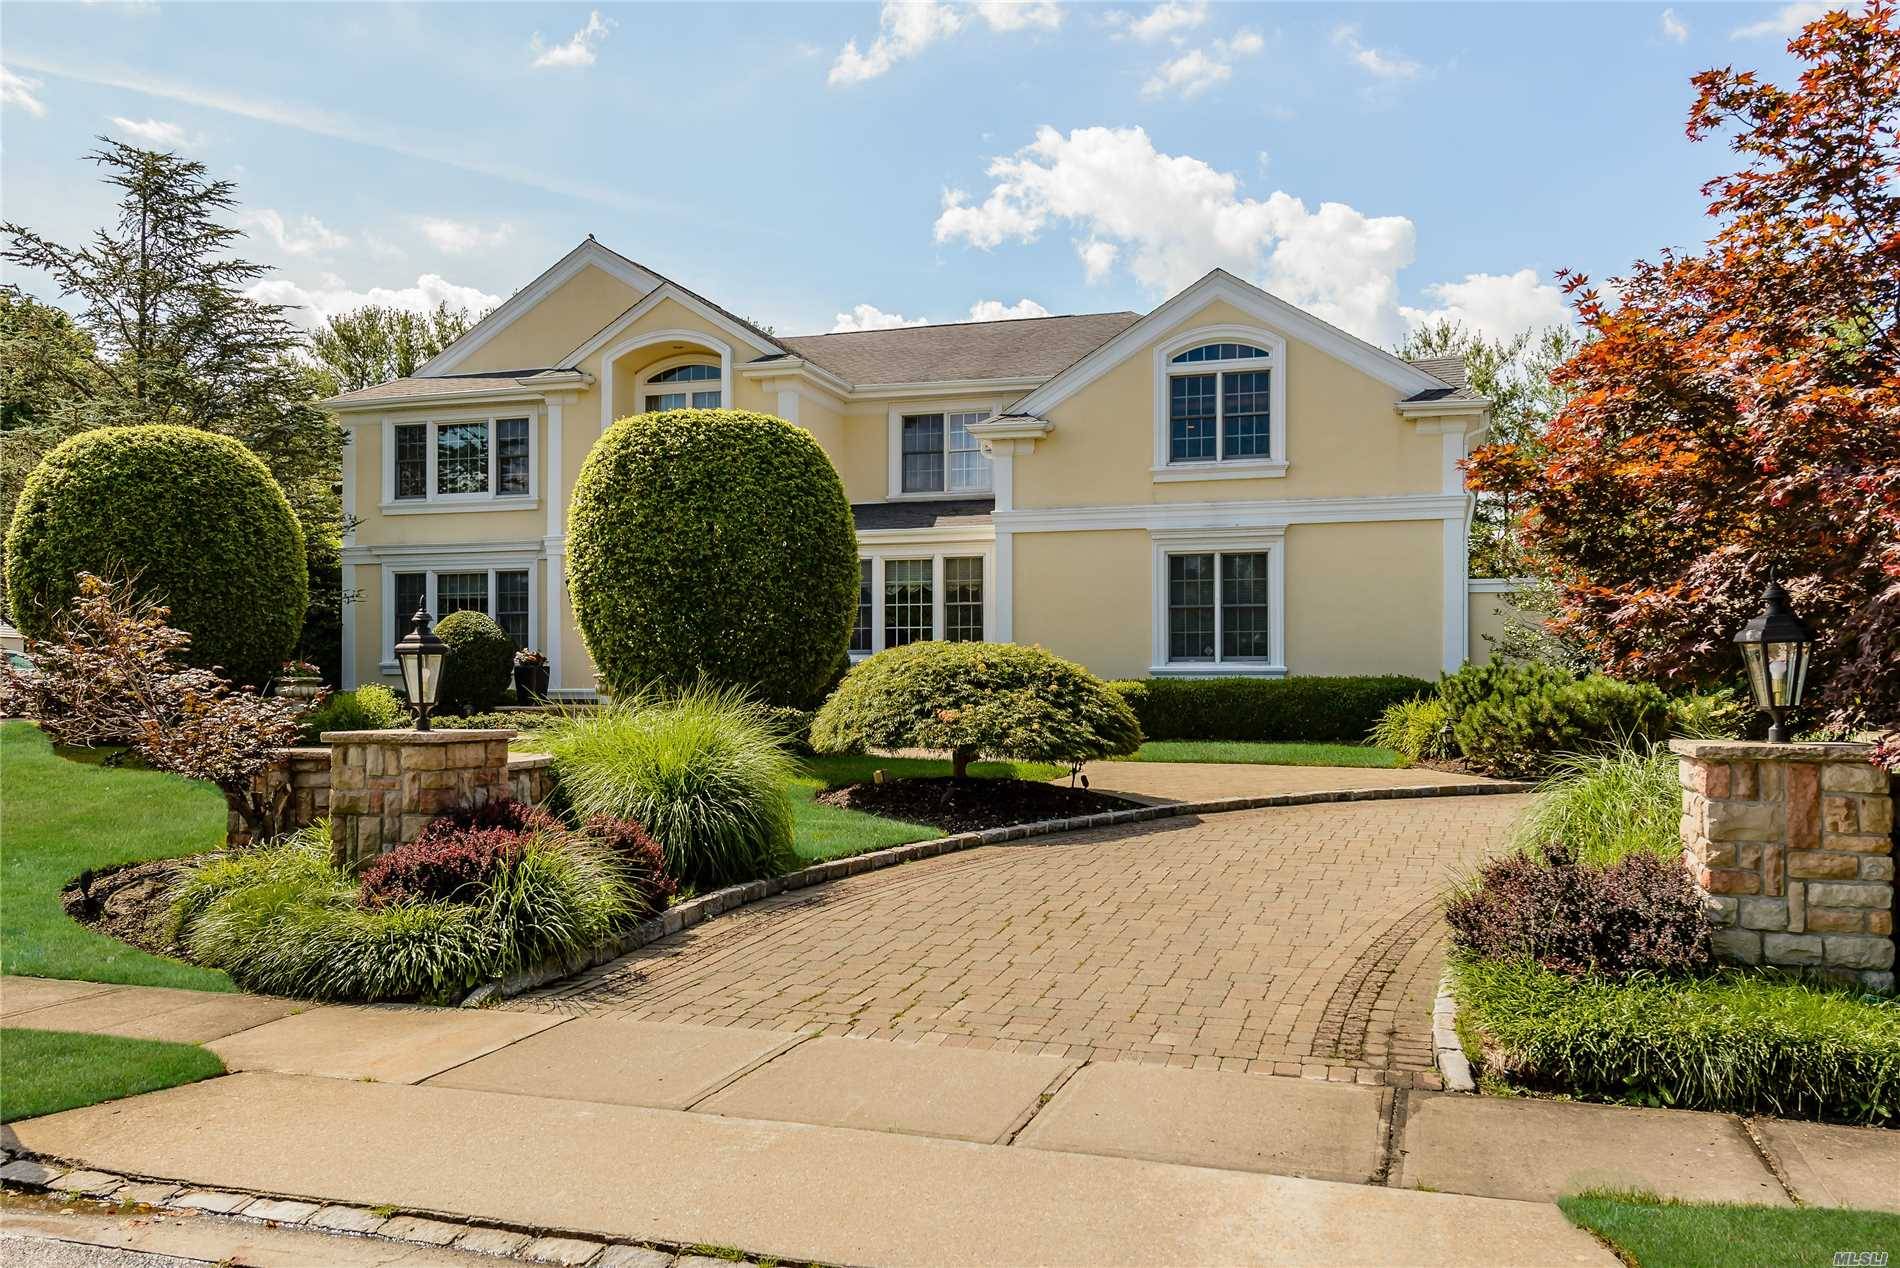 Rolling Hills Estate II. Stately Center Hall Colonial, Expansive Floor Plan With Exquisite Details And Craftsmanship.